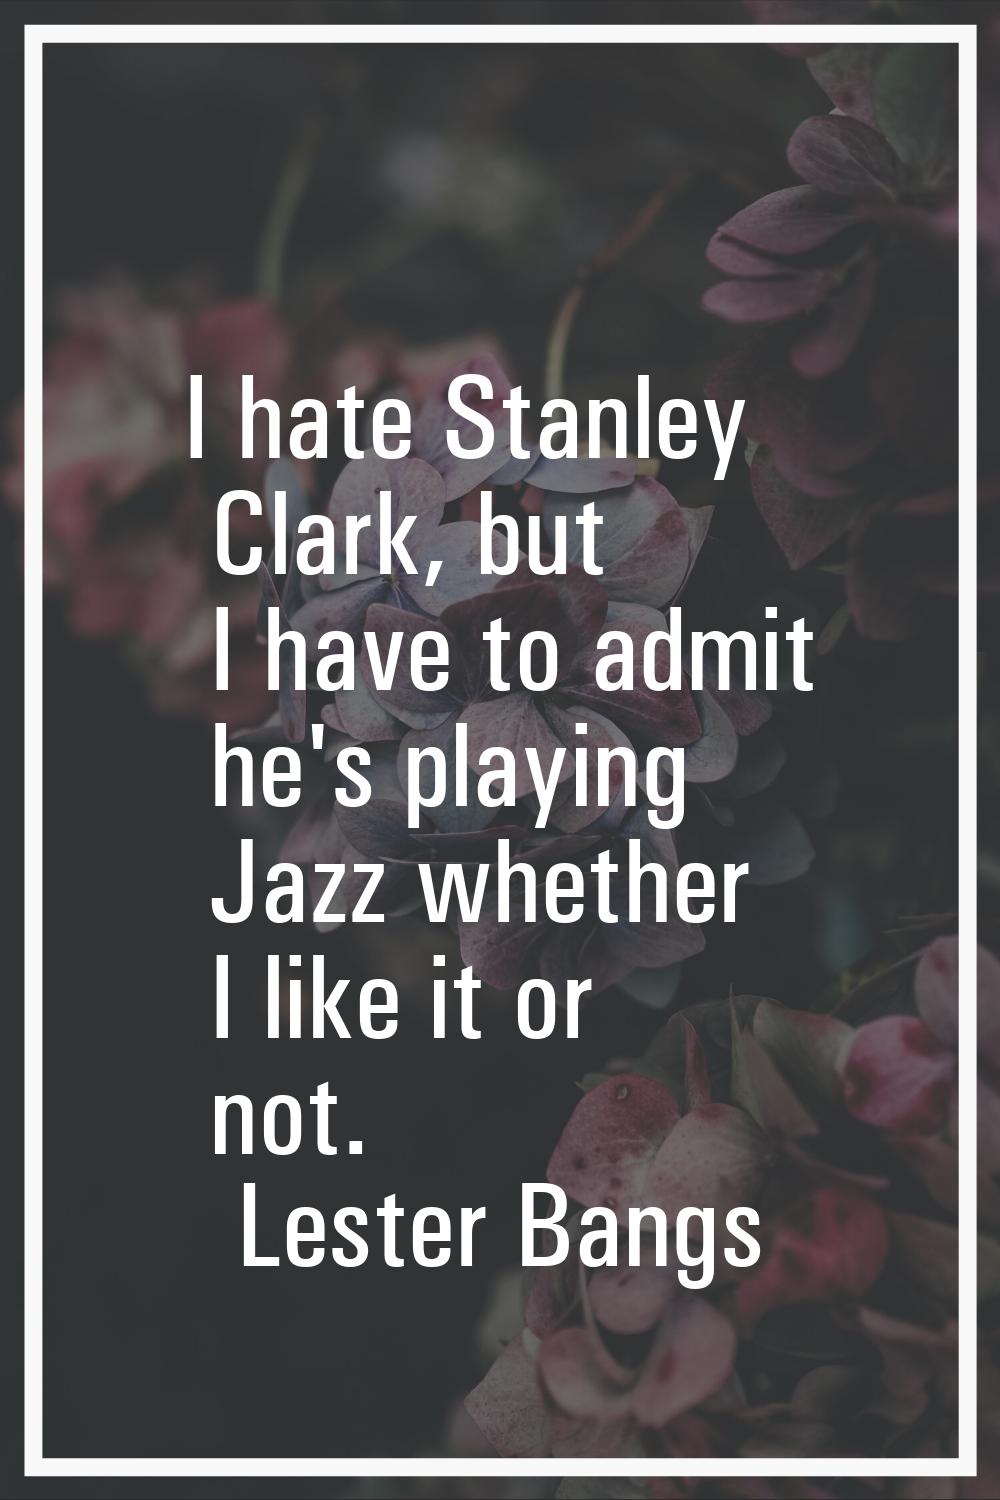 I hate Stanley Clark, but I have to admit he's playing Jazz whether I like it or not.